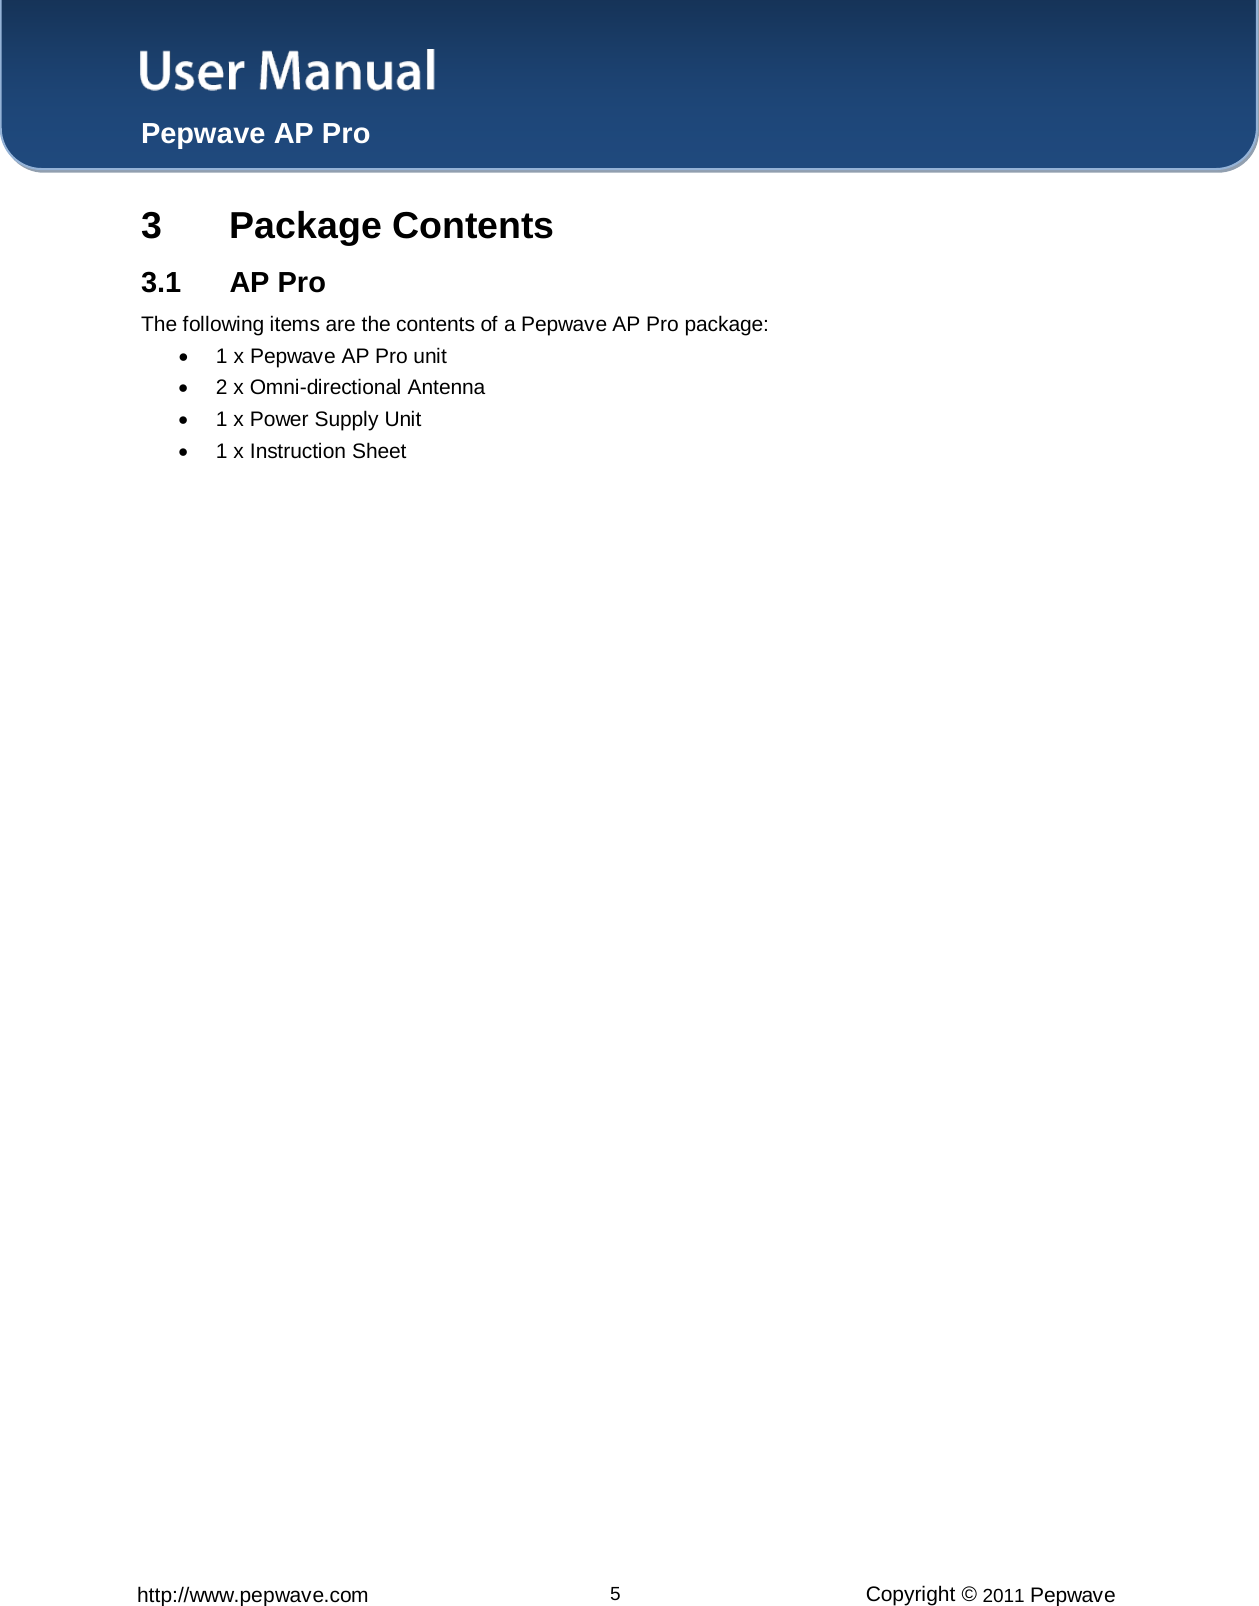 User Manual  Pepwave AP Pro http://www.pepwave.com 5 Copyright © 2011 Pepwave  3  Package Contents 3.1 AP Pro The following items are the contents of a Pepwave AP Pro package:  • 1 x Pepwave AP Pro unit  •  2 x Omni-directional Antenna  • 1 x Power Supply Unit • 1 x Instruction Sheet   